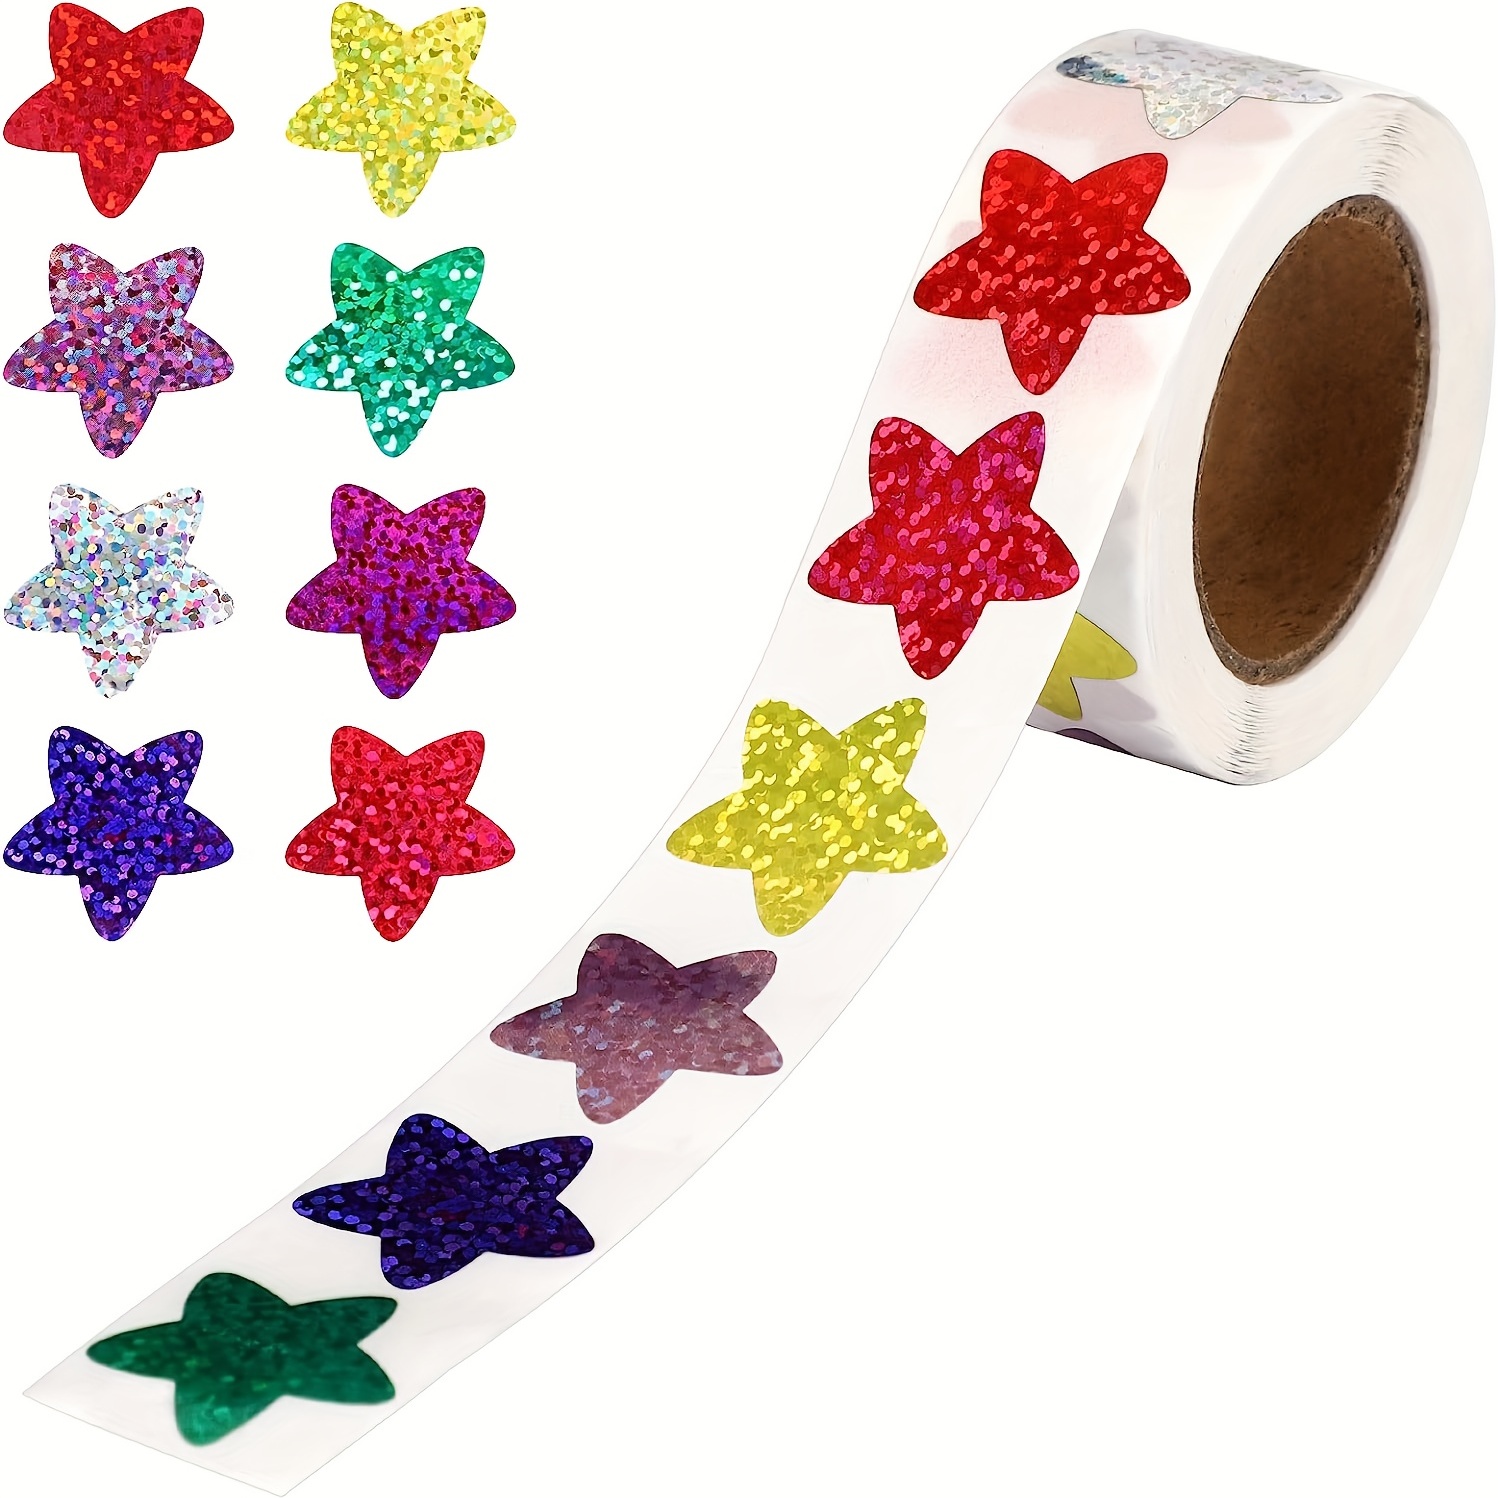 Small Foil Star Stickers - 9 Colors Foil Star Metallic Stickers for Kids  Reward Self-Adhesive Holographic Star Sticker Reward Labels for DIY Crafts